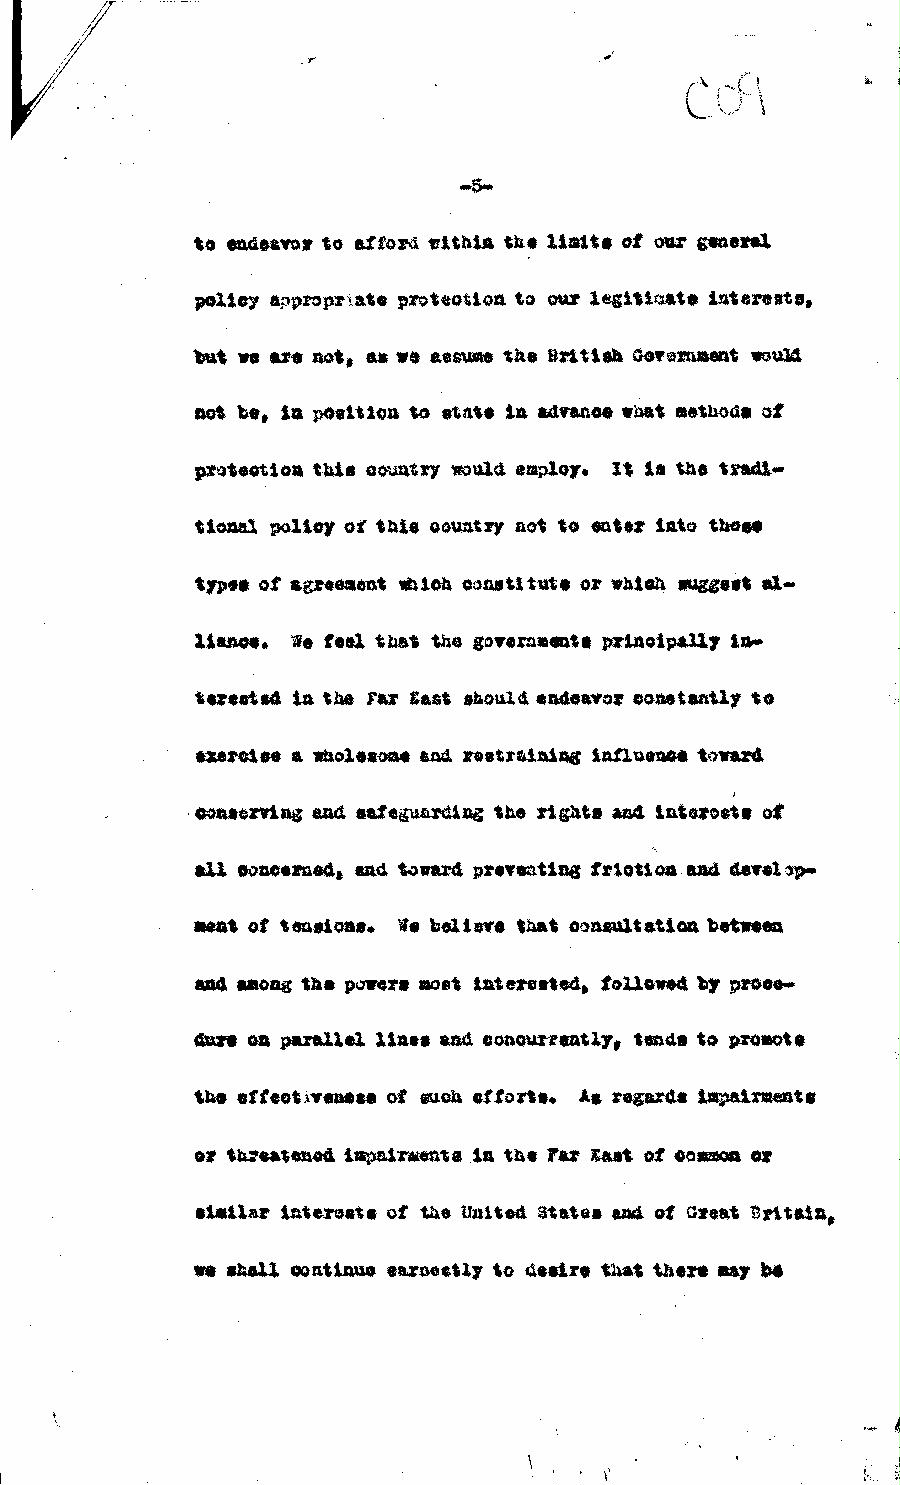 [a303c09.jpg] - Cont-memo from Dept. of State5/28/37